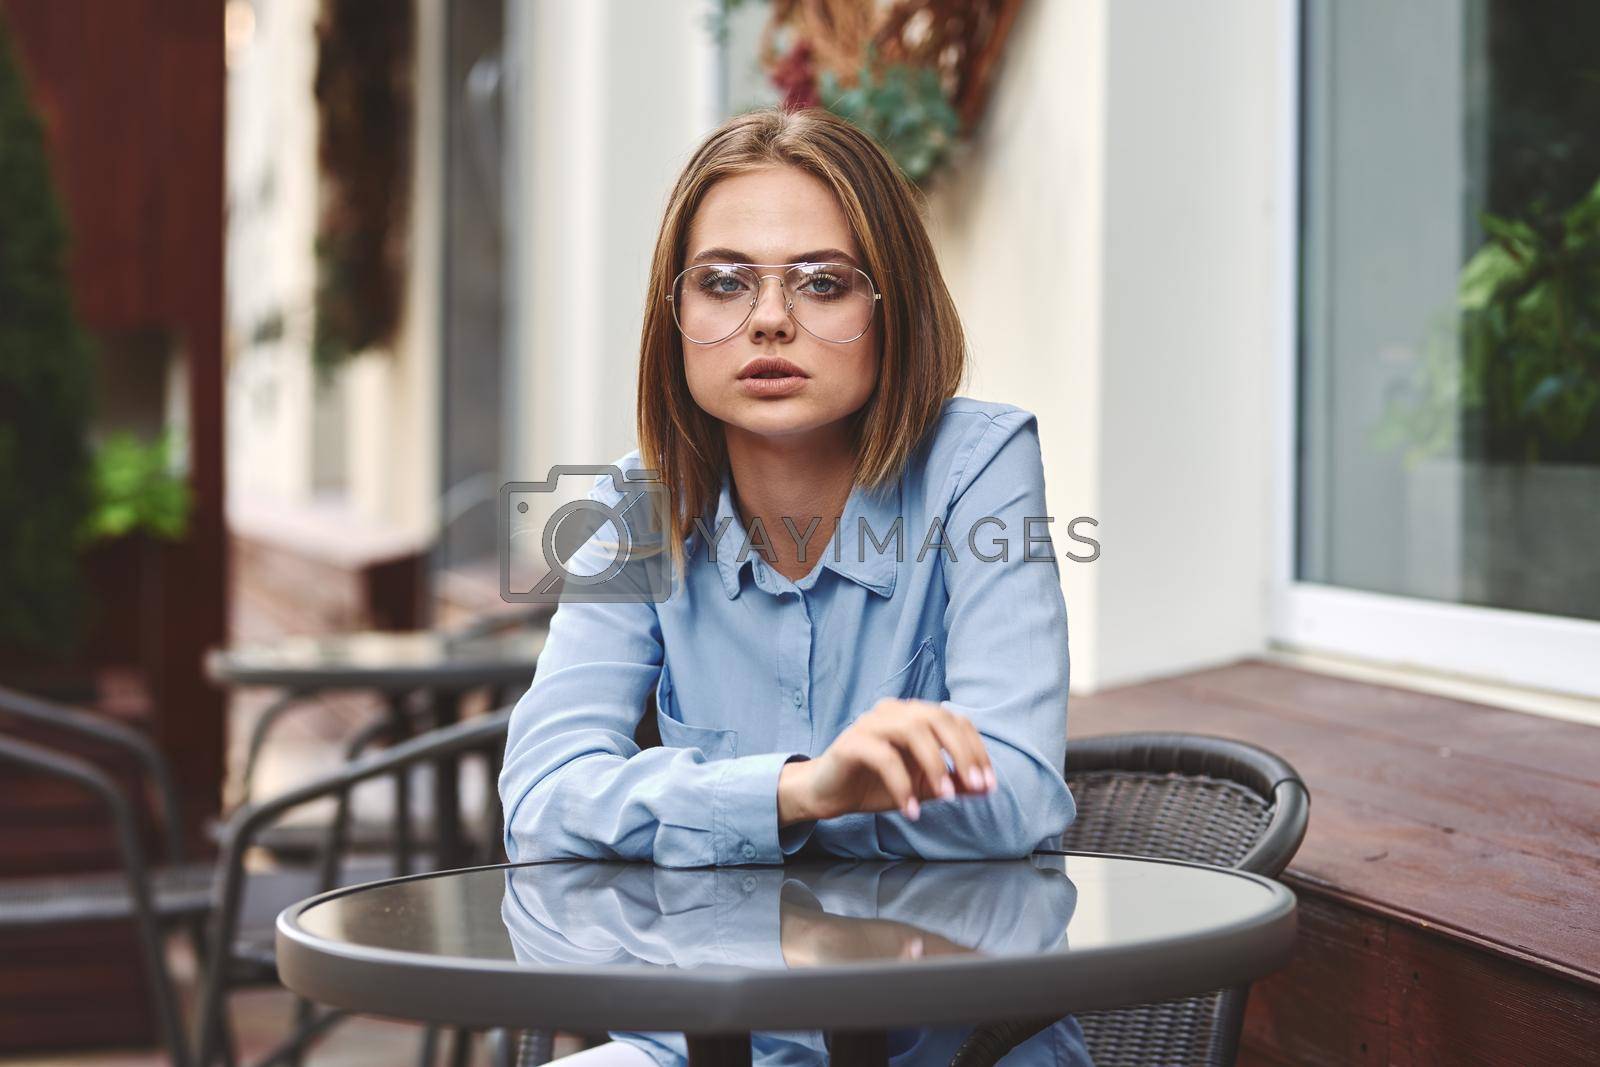 Royalty free image of business woman outdoors in a cafe leisure official professional by Vichizh